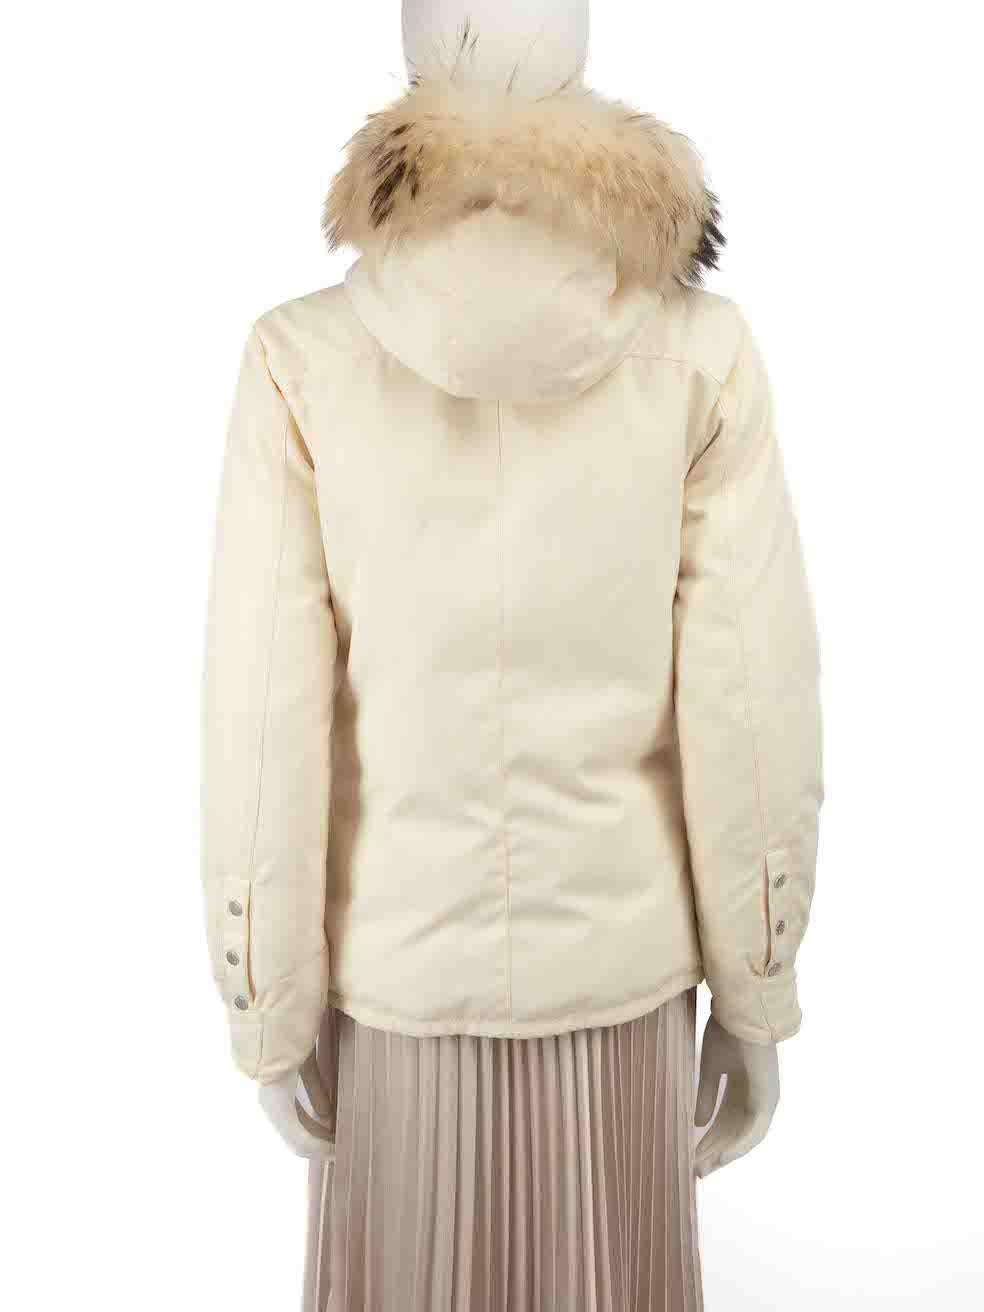 Moncler Ecru Fur Trimmed Padded Coat Size S In Good Condition For Sale In London, GB